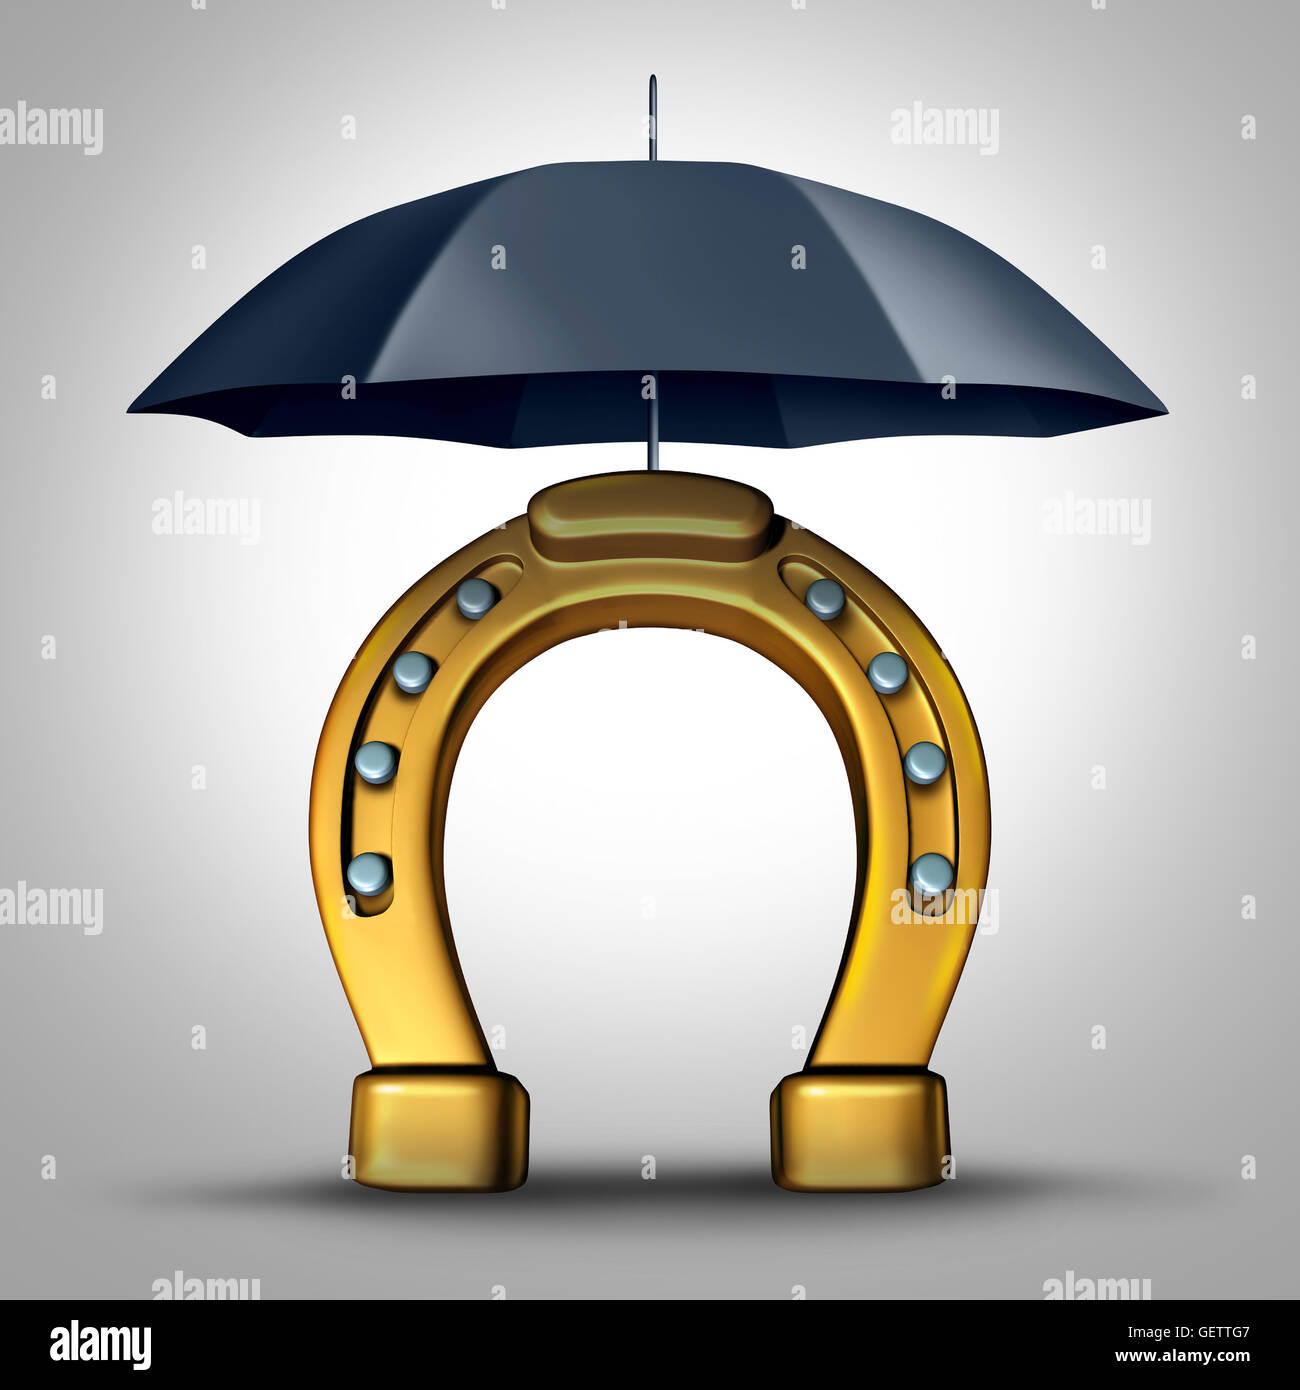 Financial prosperity security and protecting fortune wealth metaphor and luck concept as a horse shoe or horseshoe icon pretected by an umbrella as a 3D illustration. Stock Photo